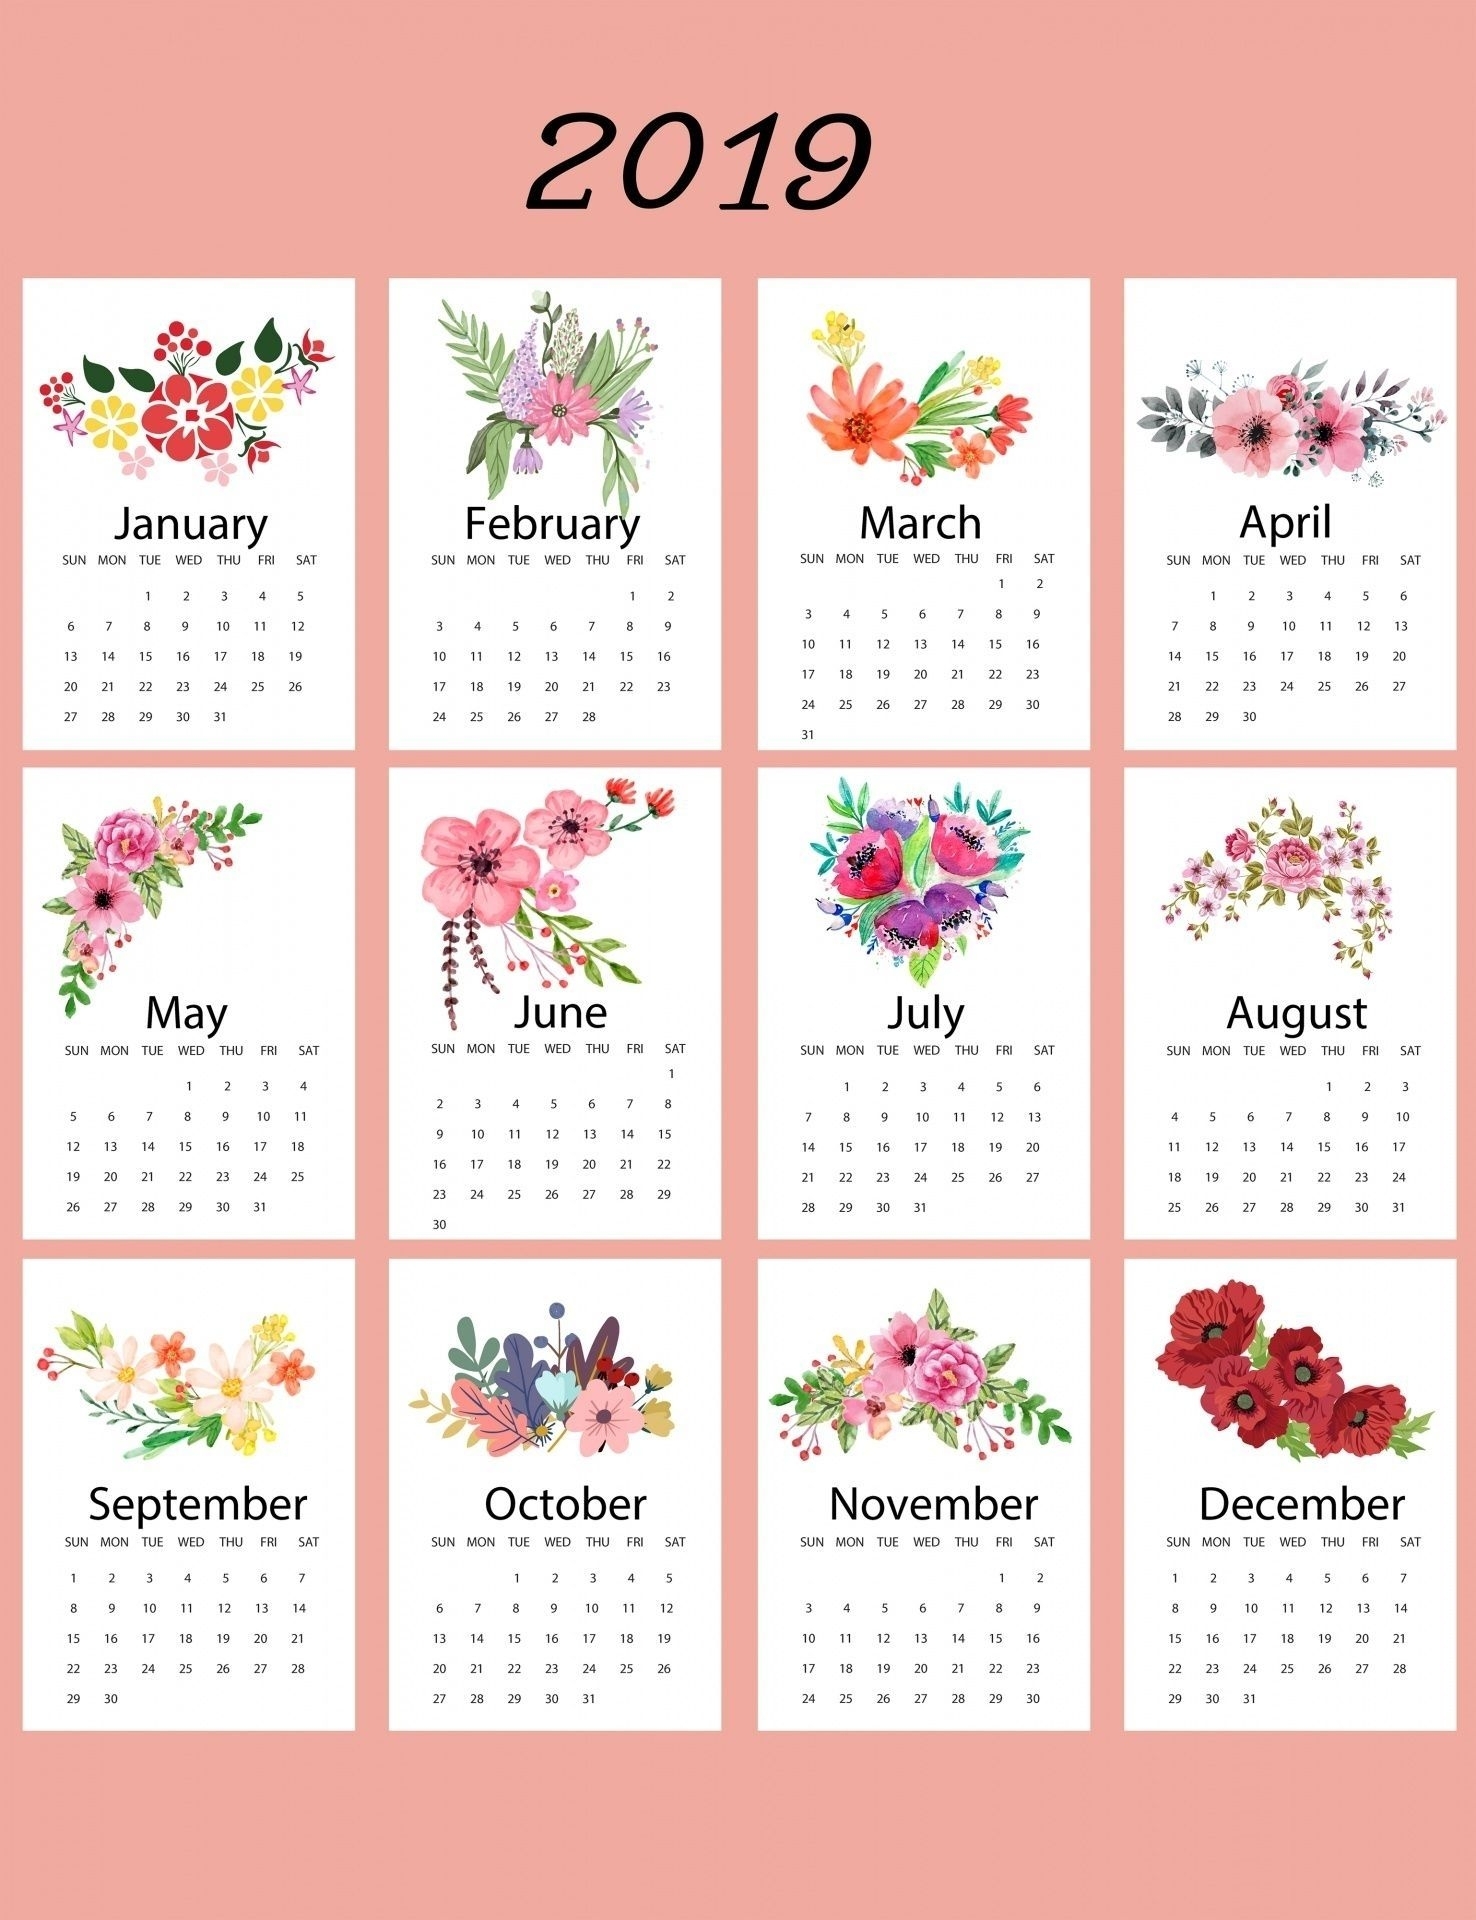 Bc Free 2020 At A Glance Calendar In 2020 | Calendar 2019 with regard to Inspiration Calendar At A Glance